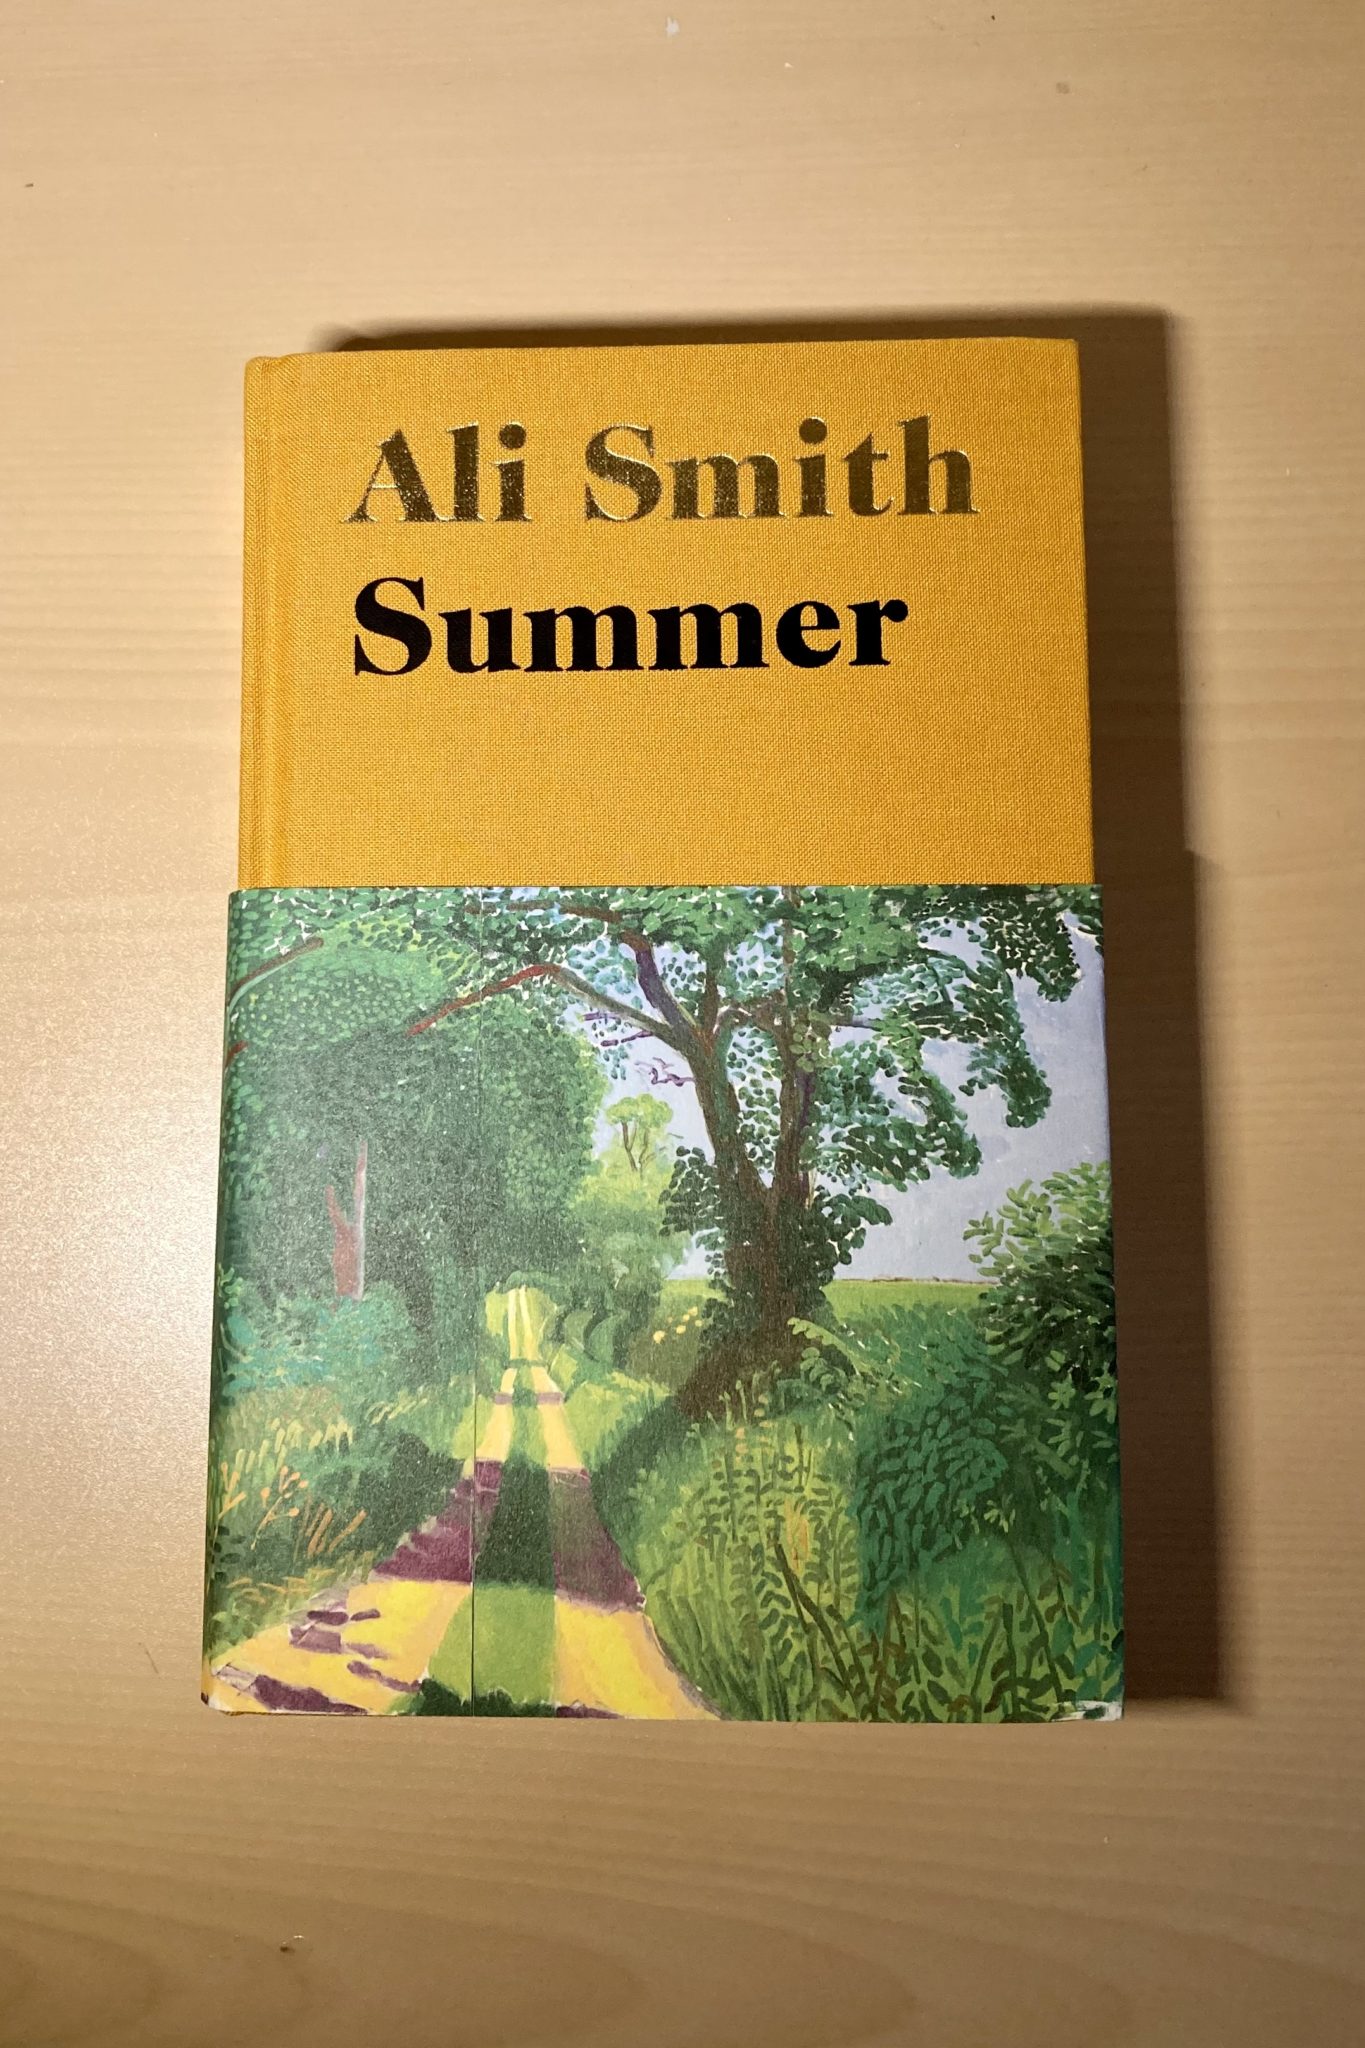 summer by ali smith